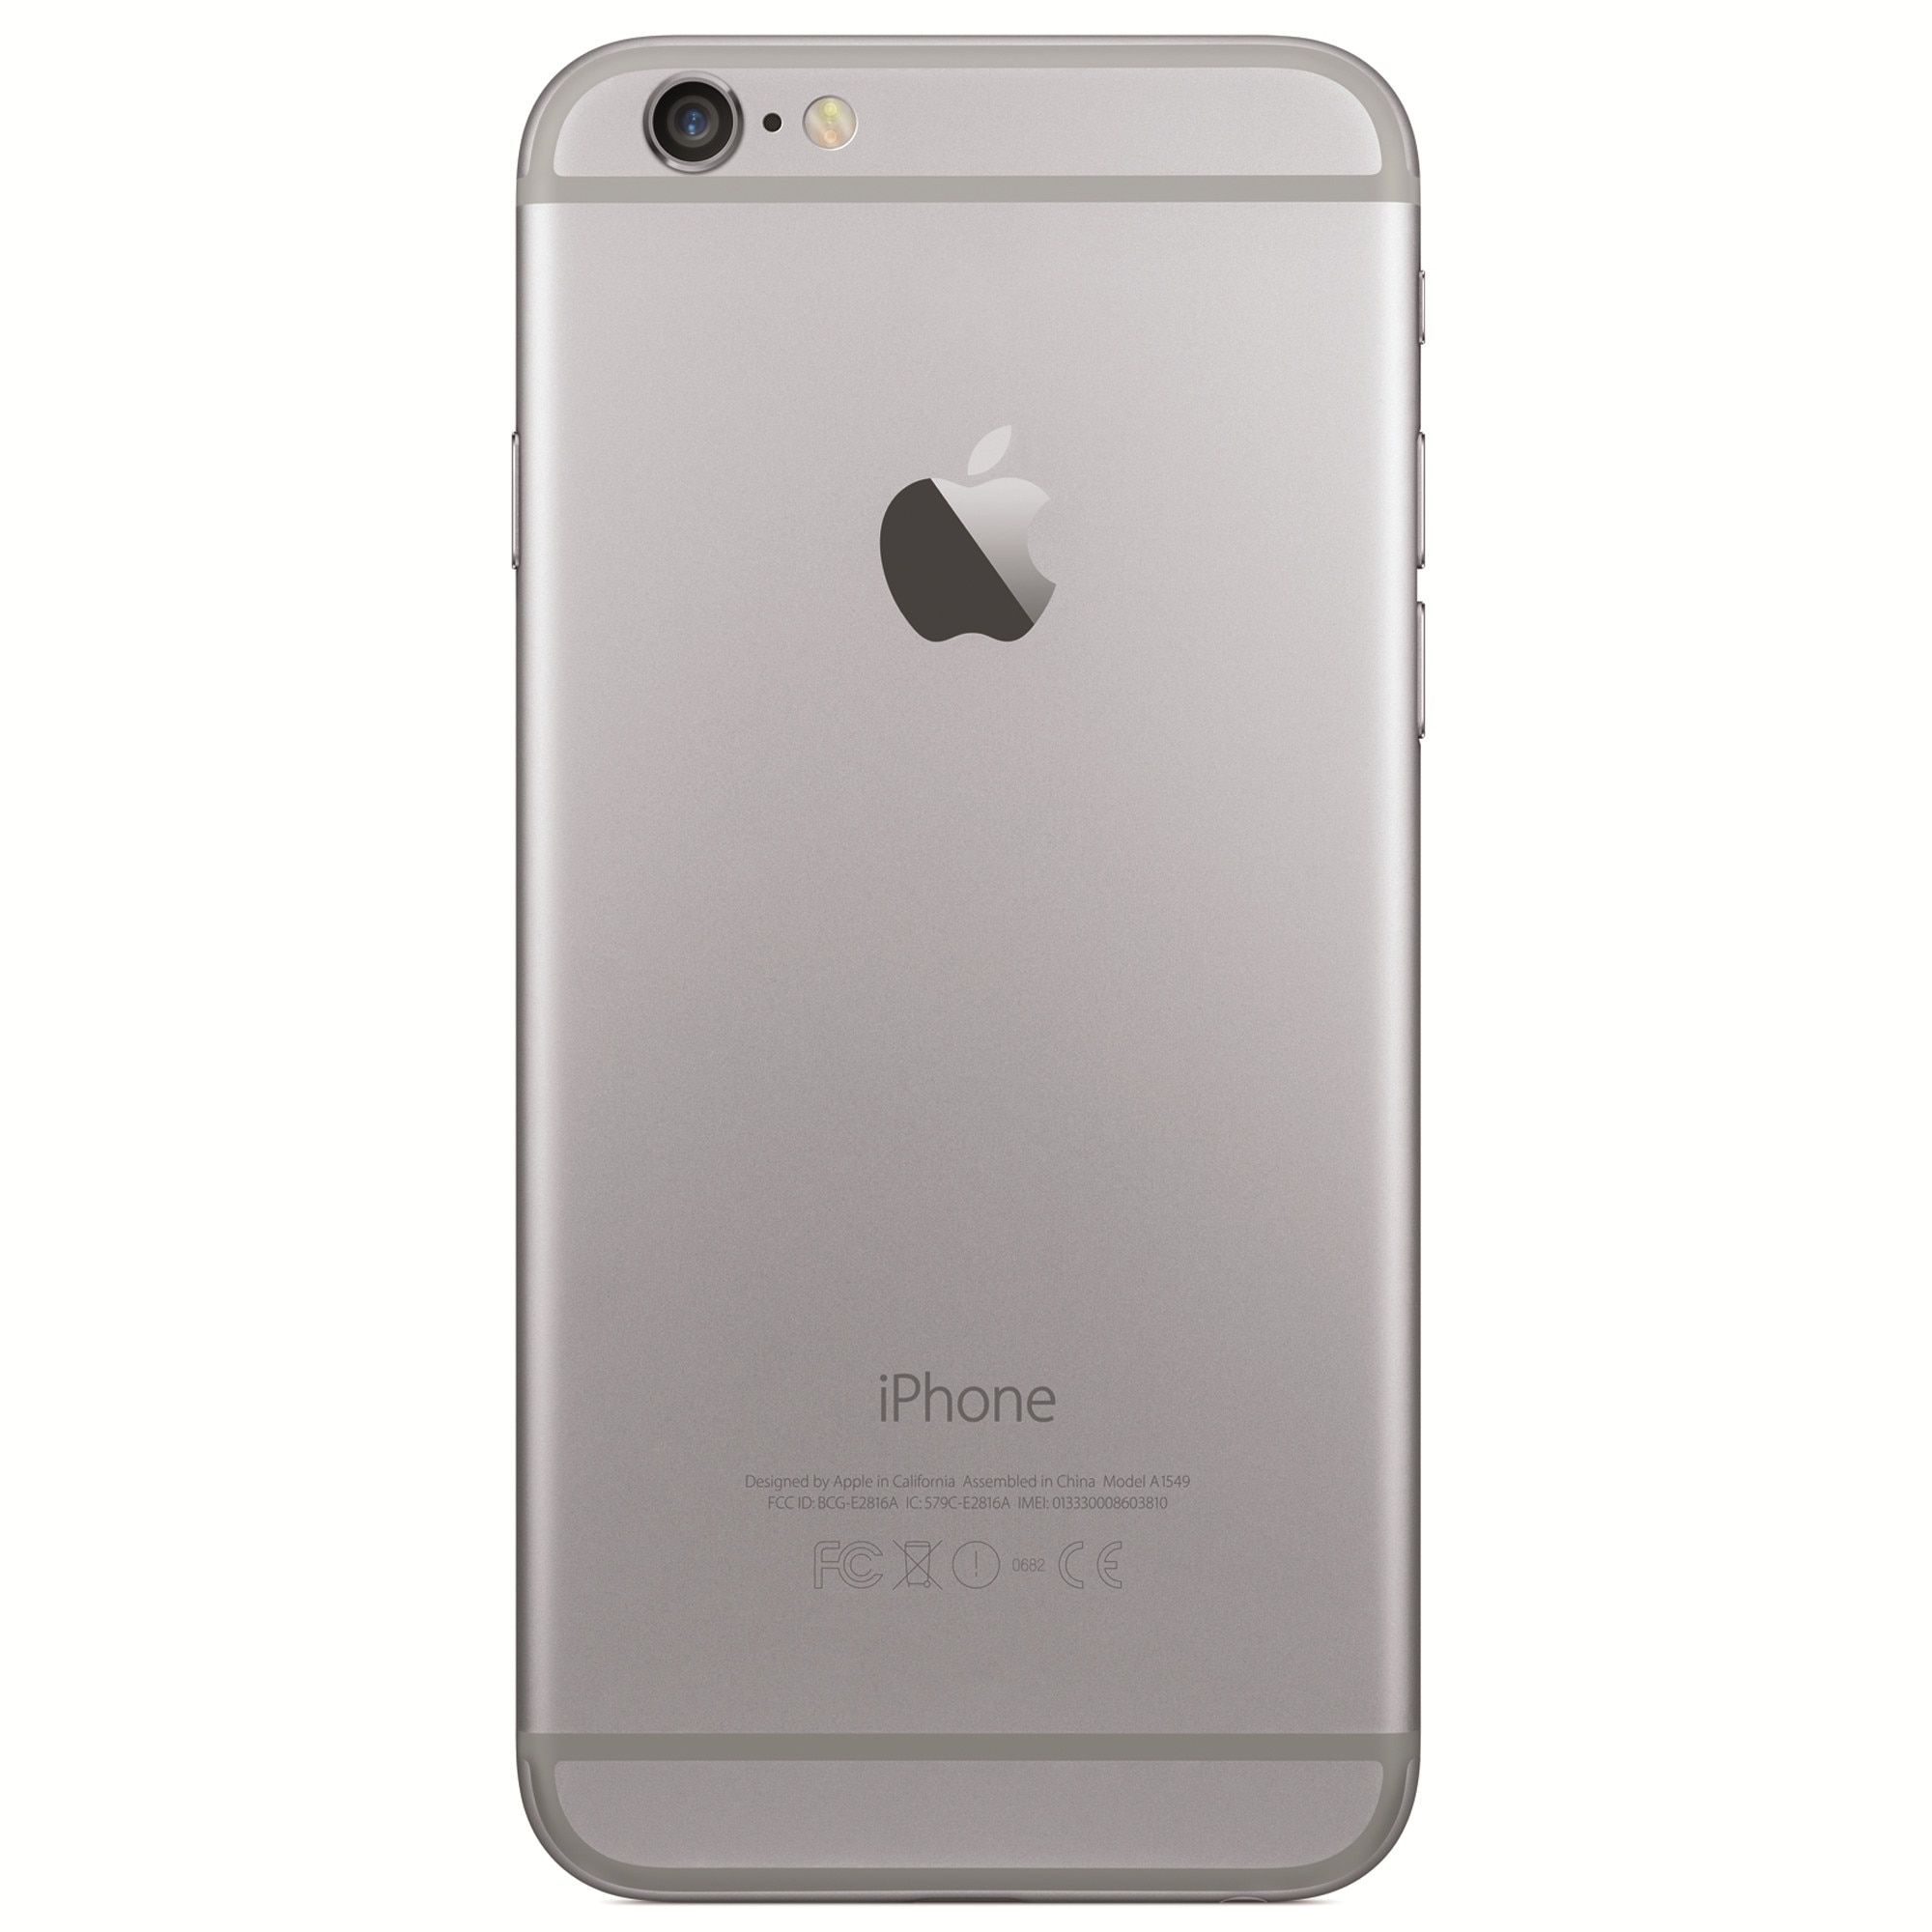 Feud mineral moron Telefon mobil Apple iPhone 6, 32GB, Space Gray - eMAG.ro